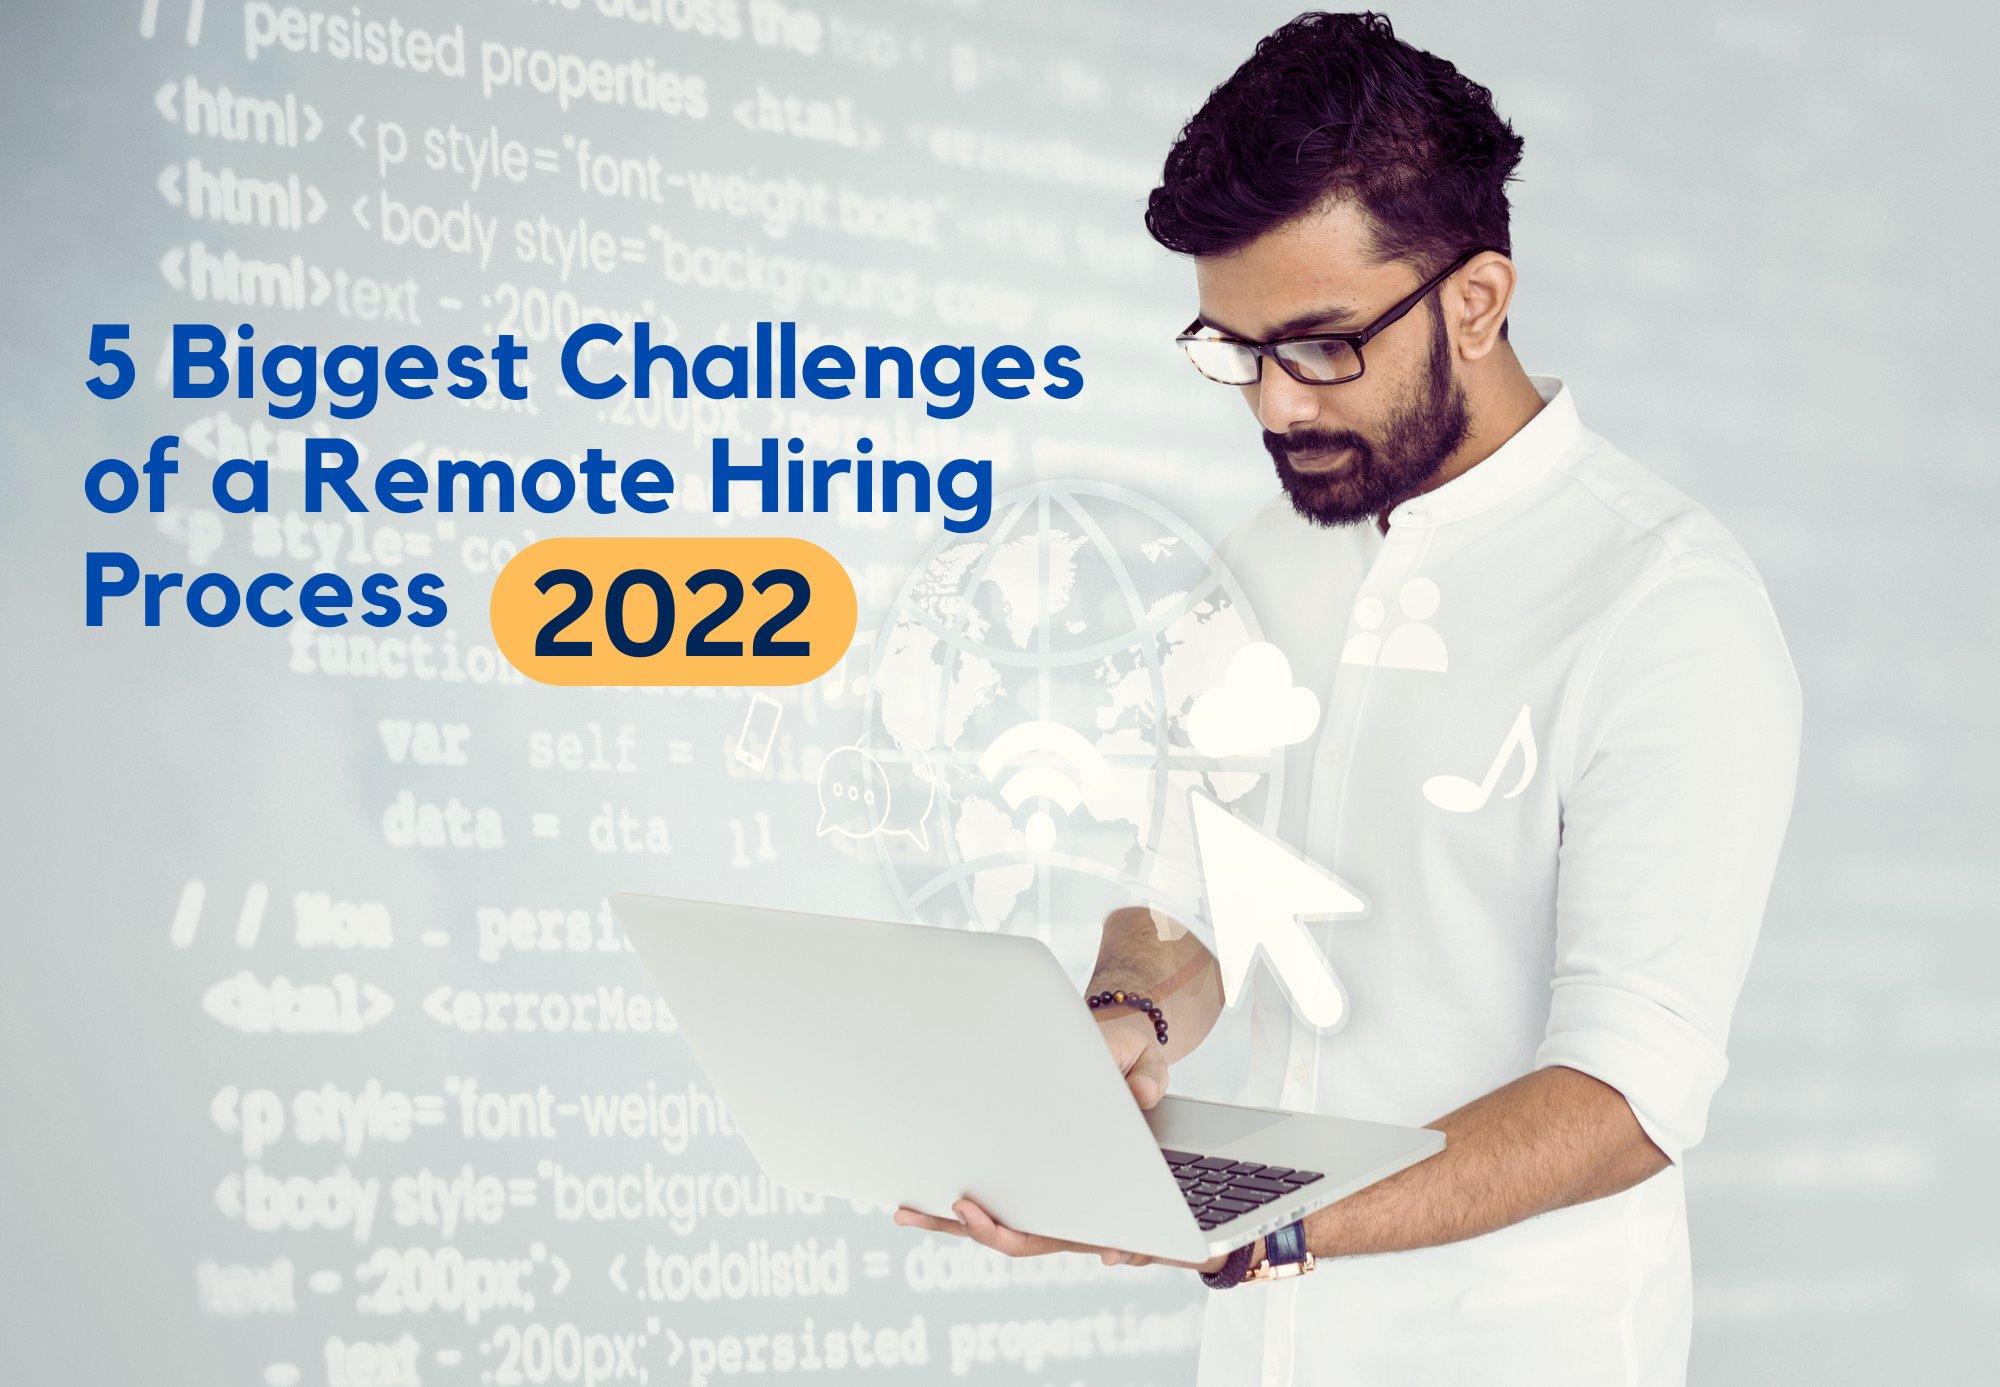 5 Biggest Challenges of a Remote Hiring Process